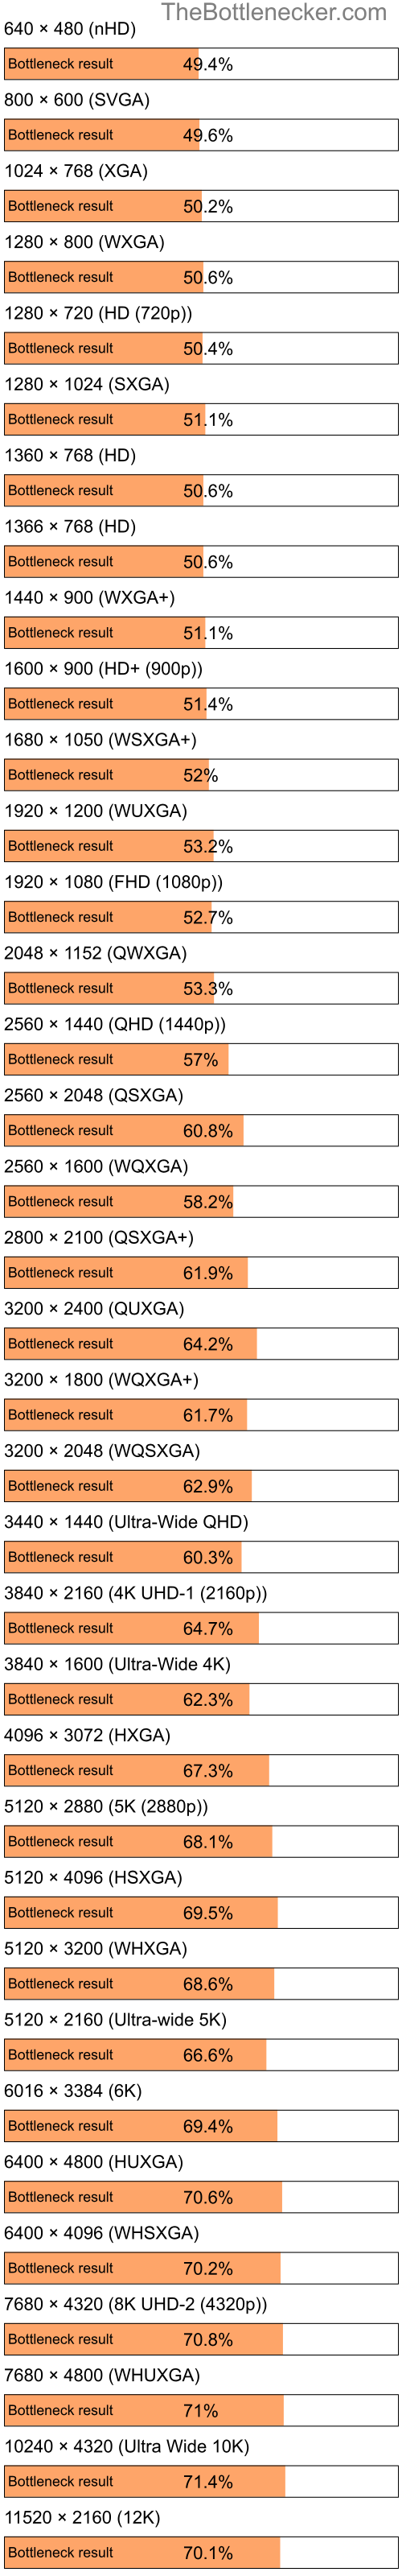 Bottleneck results by resolution for Intel Pentium 4 and AMD Mobility Radeon HD 4250 in Processor Intense Tasks